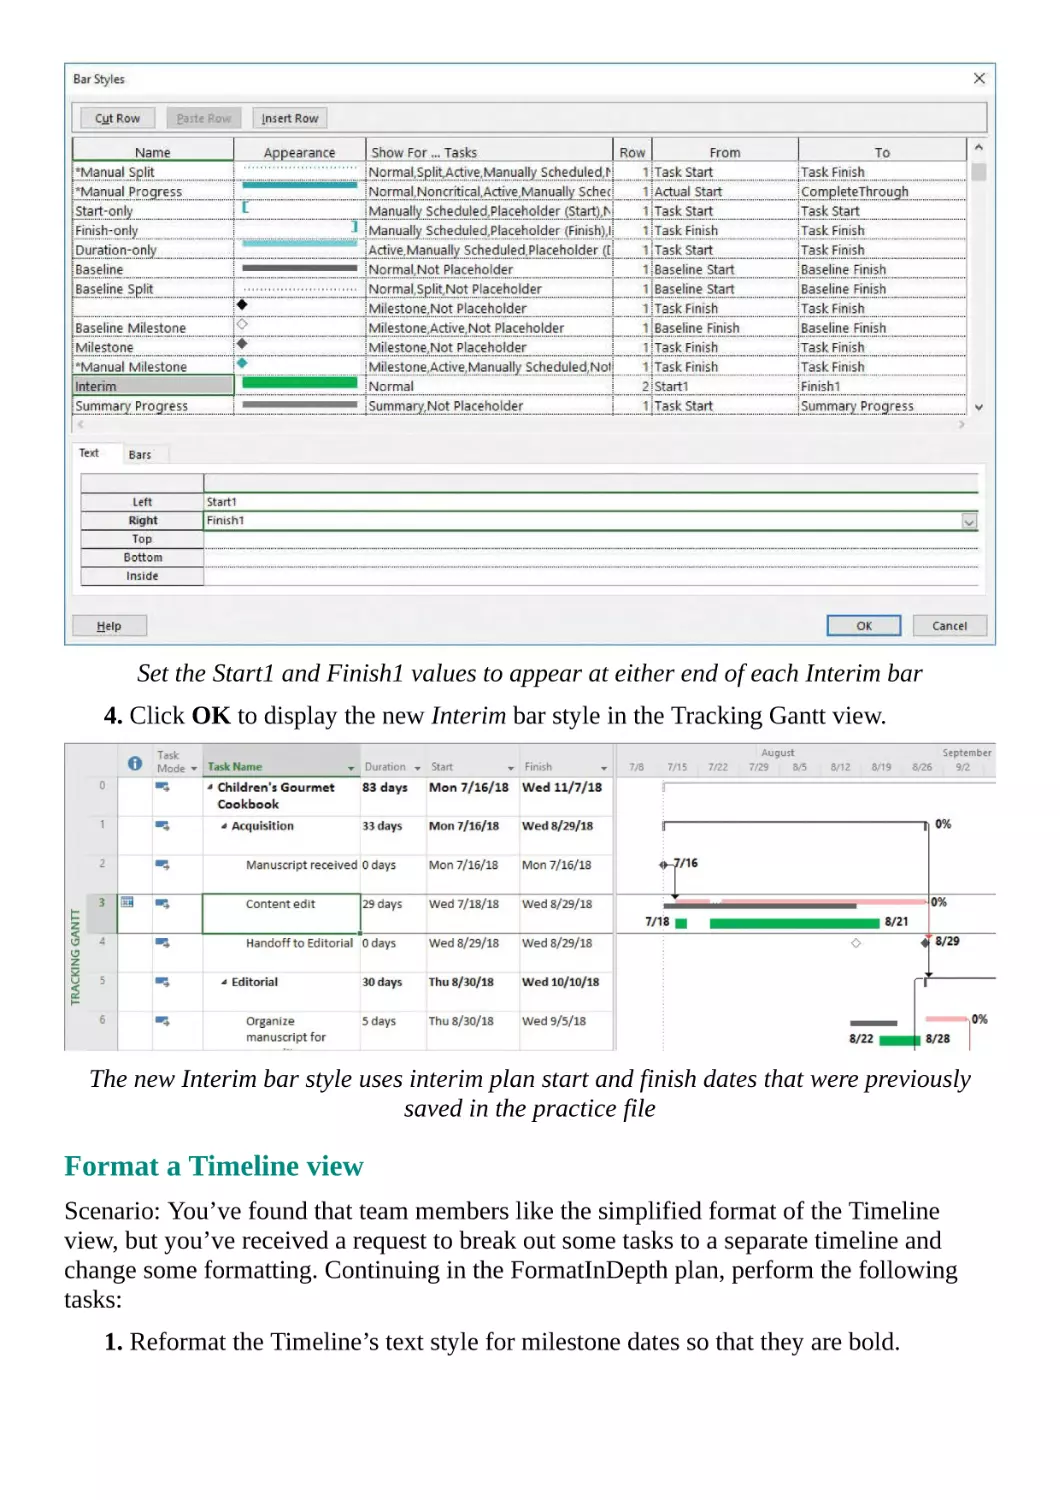 Format a Timeline view